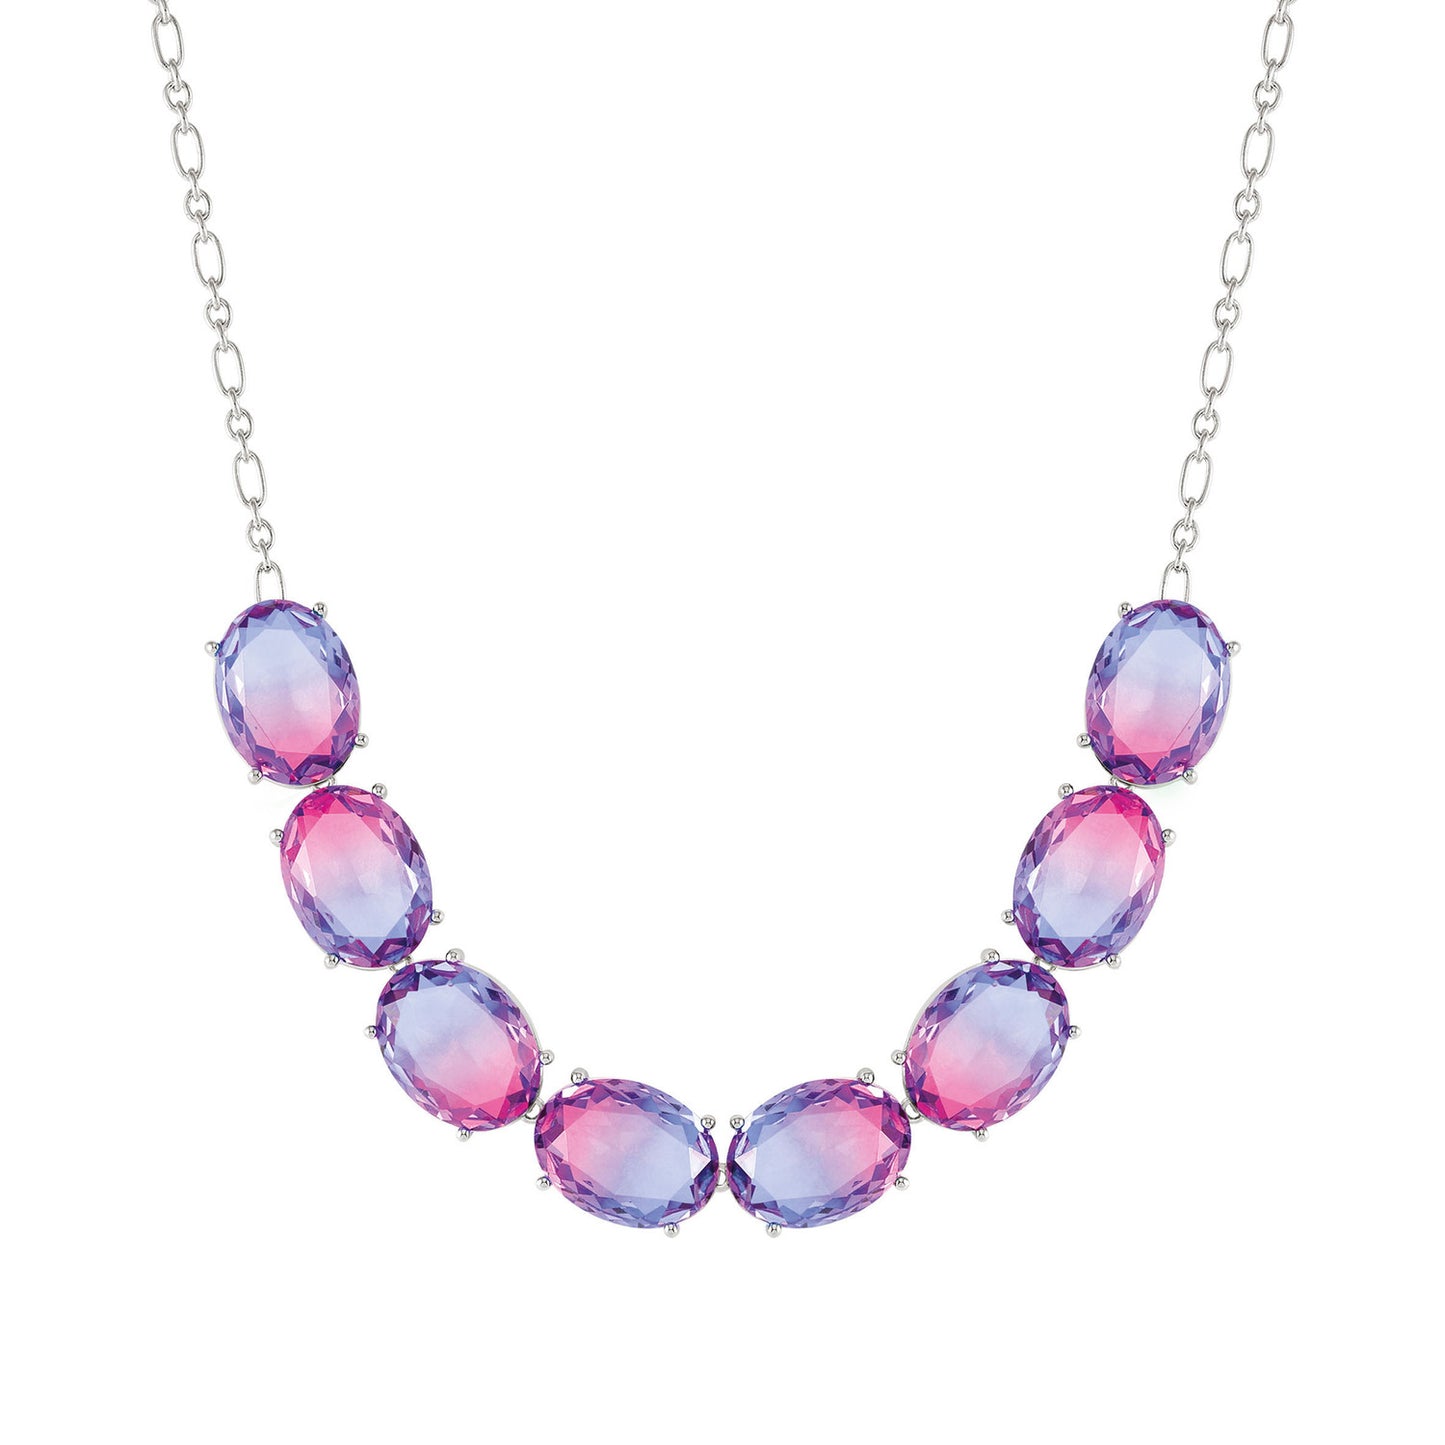 240812/028 SYMBIOSI Sterling Silver necklace BICOLOR stones (LARGE) (028_PINK-PURPLE)